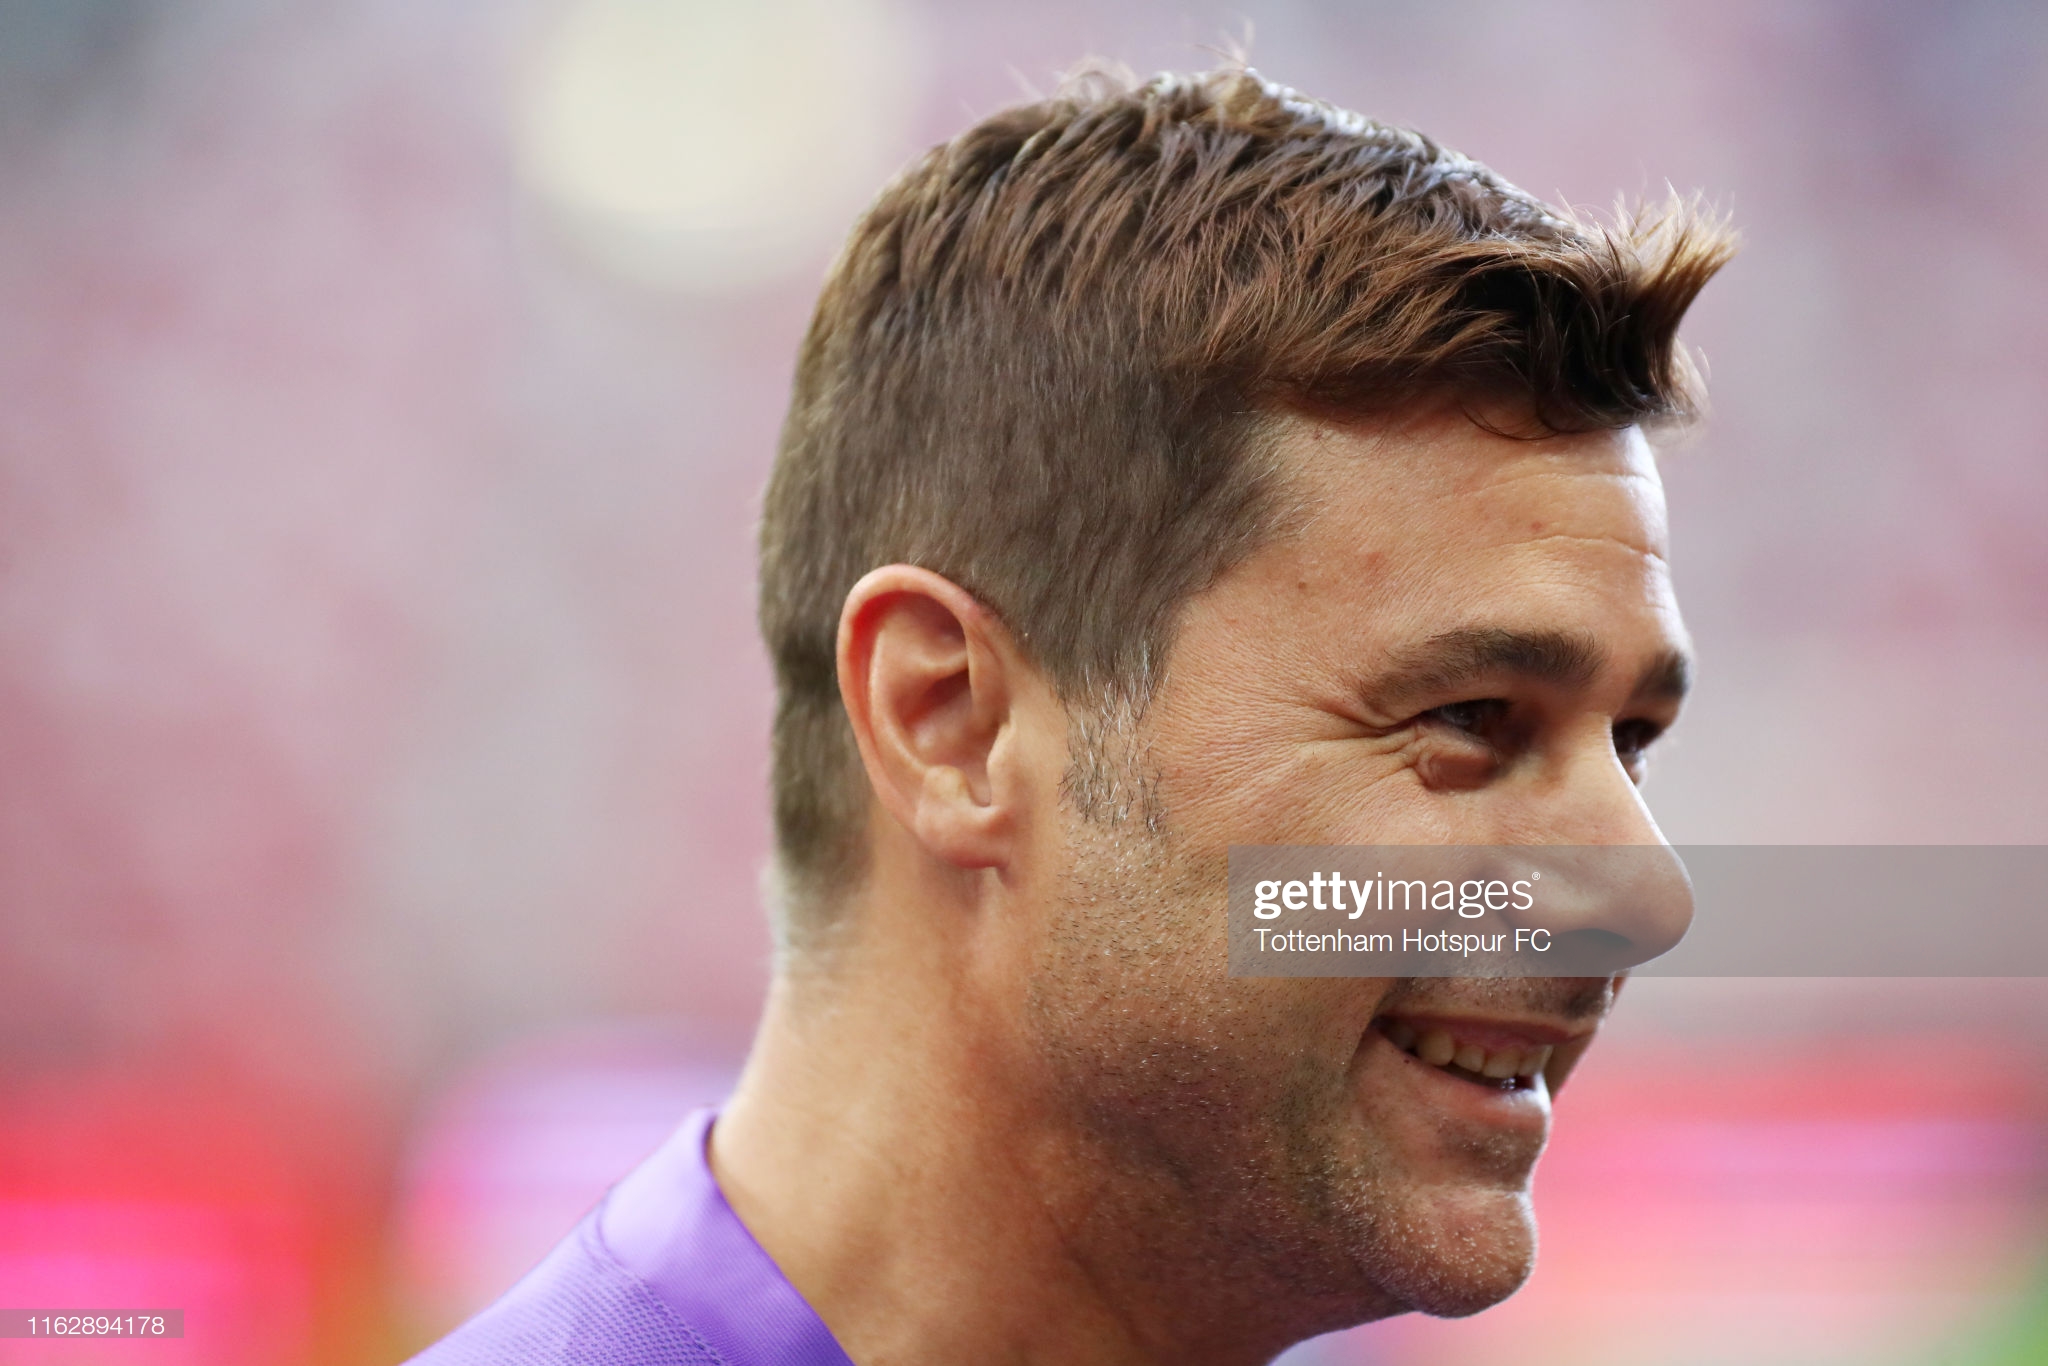 gettyimages-1162894178-2048x2048.jpg